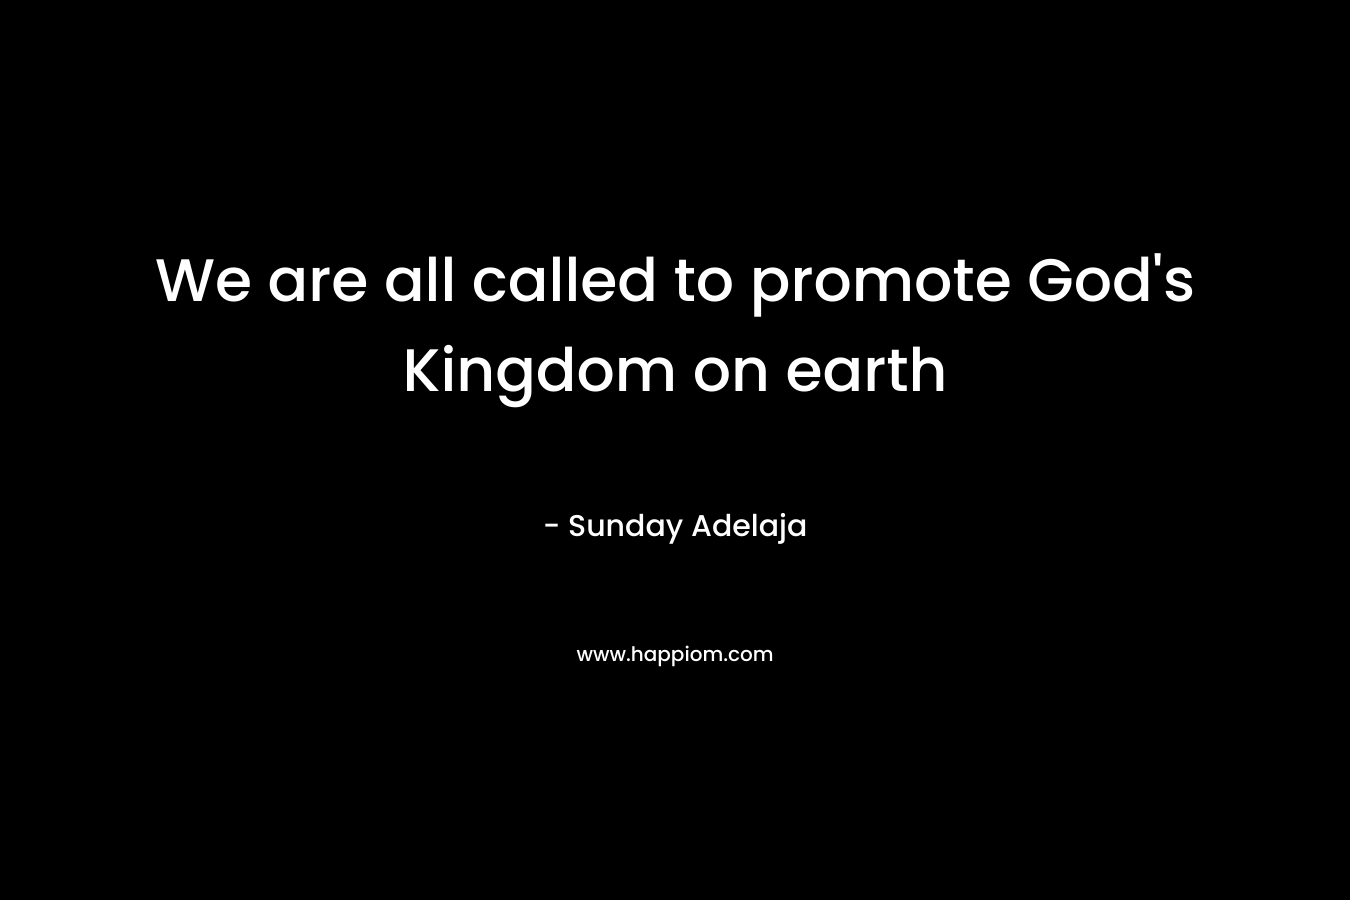 We are all called to promote God's Kingdom on earth